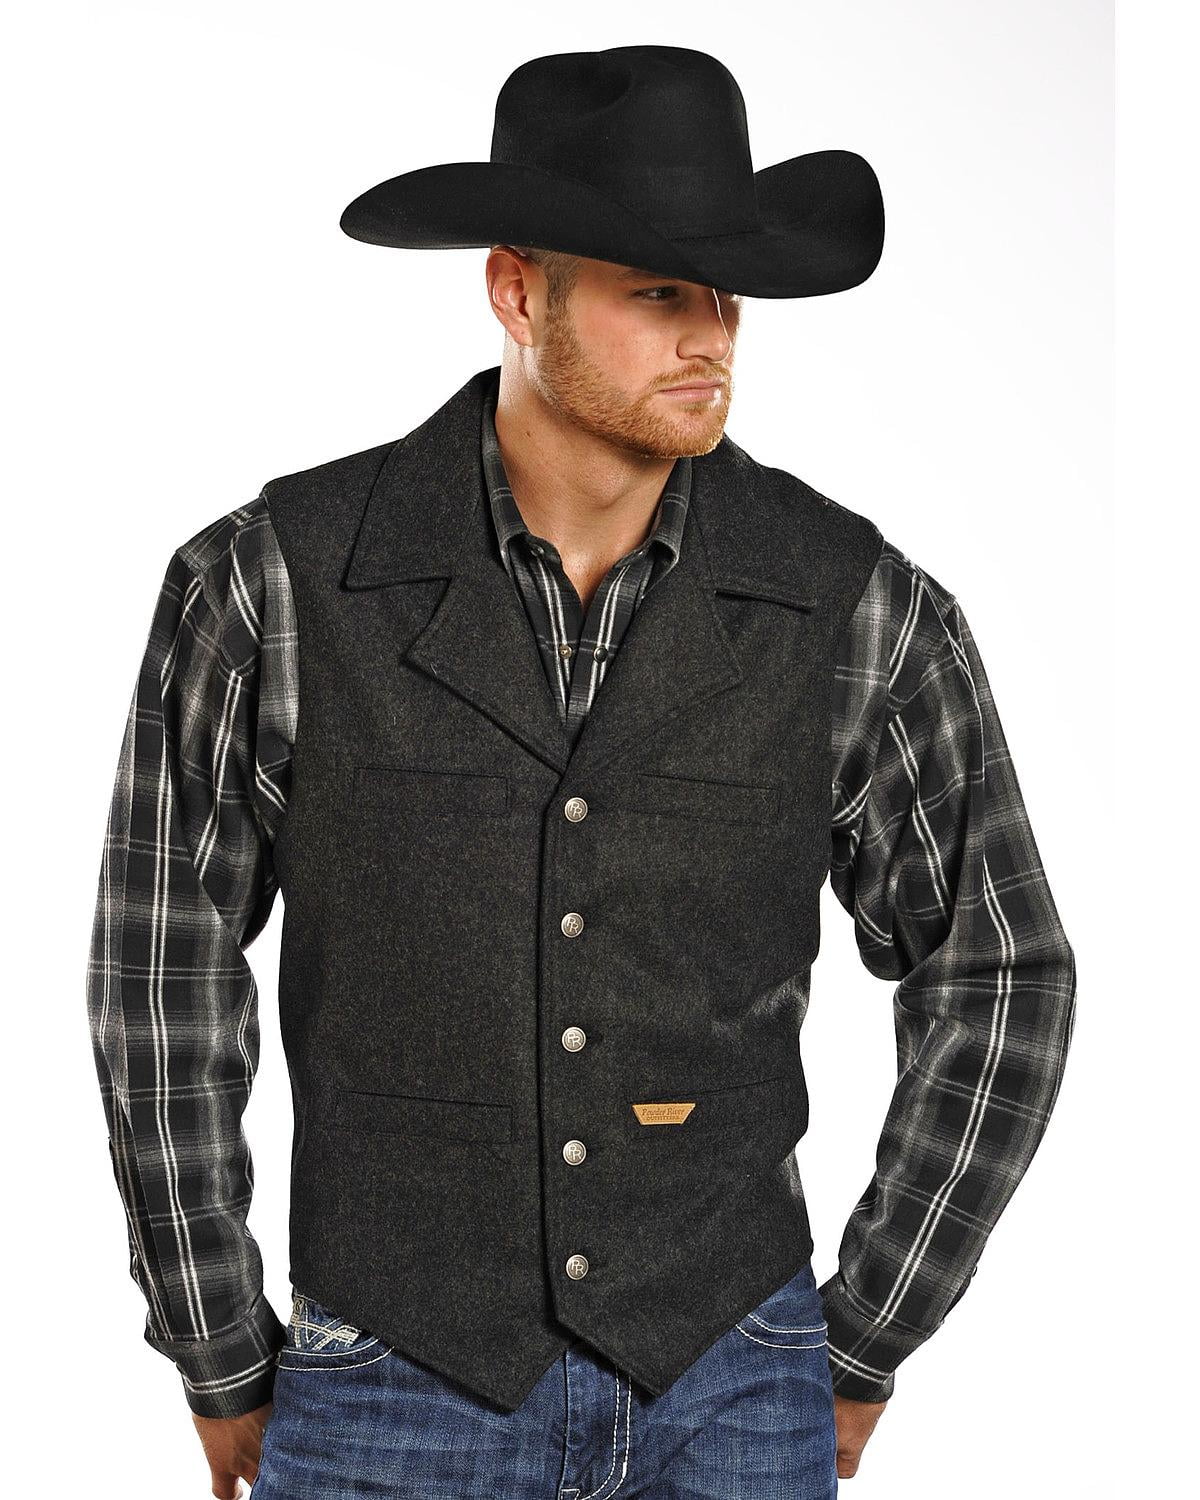 Powder River Outfitters - Powder River Outfitters Men's Wool Montana ...